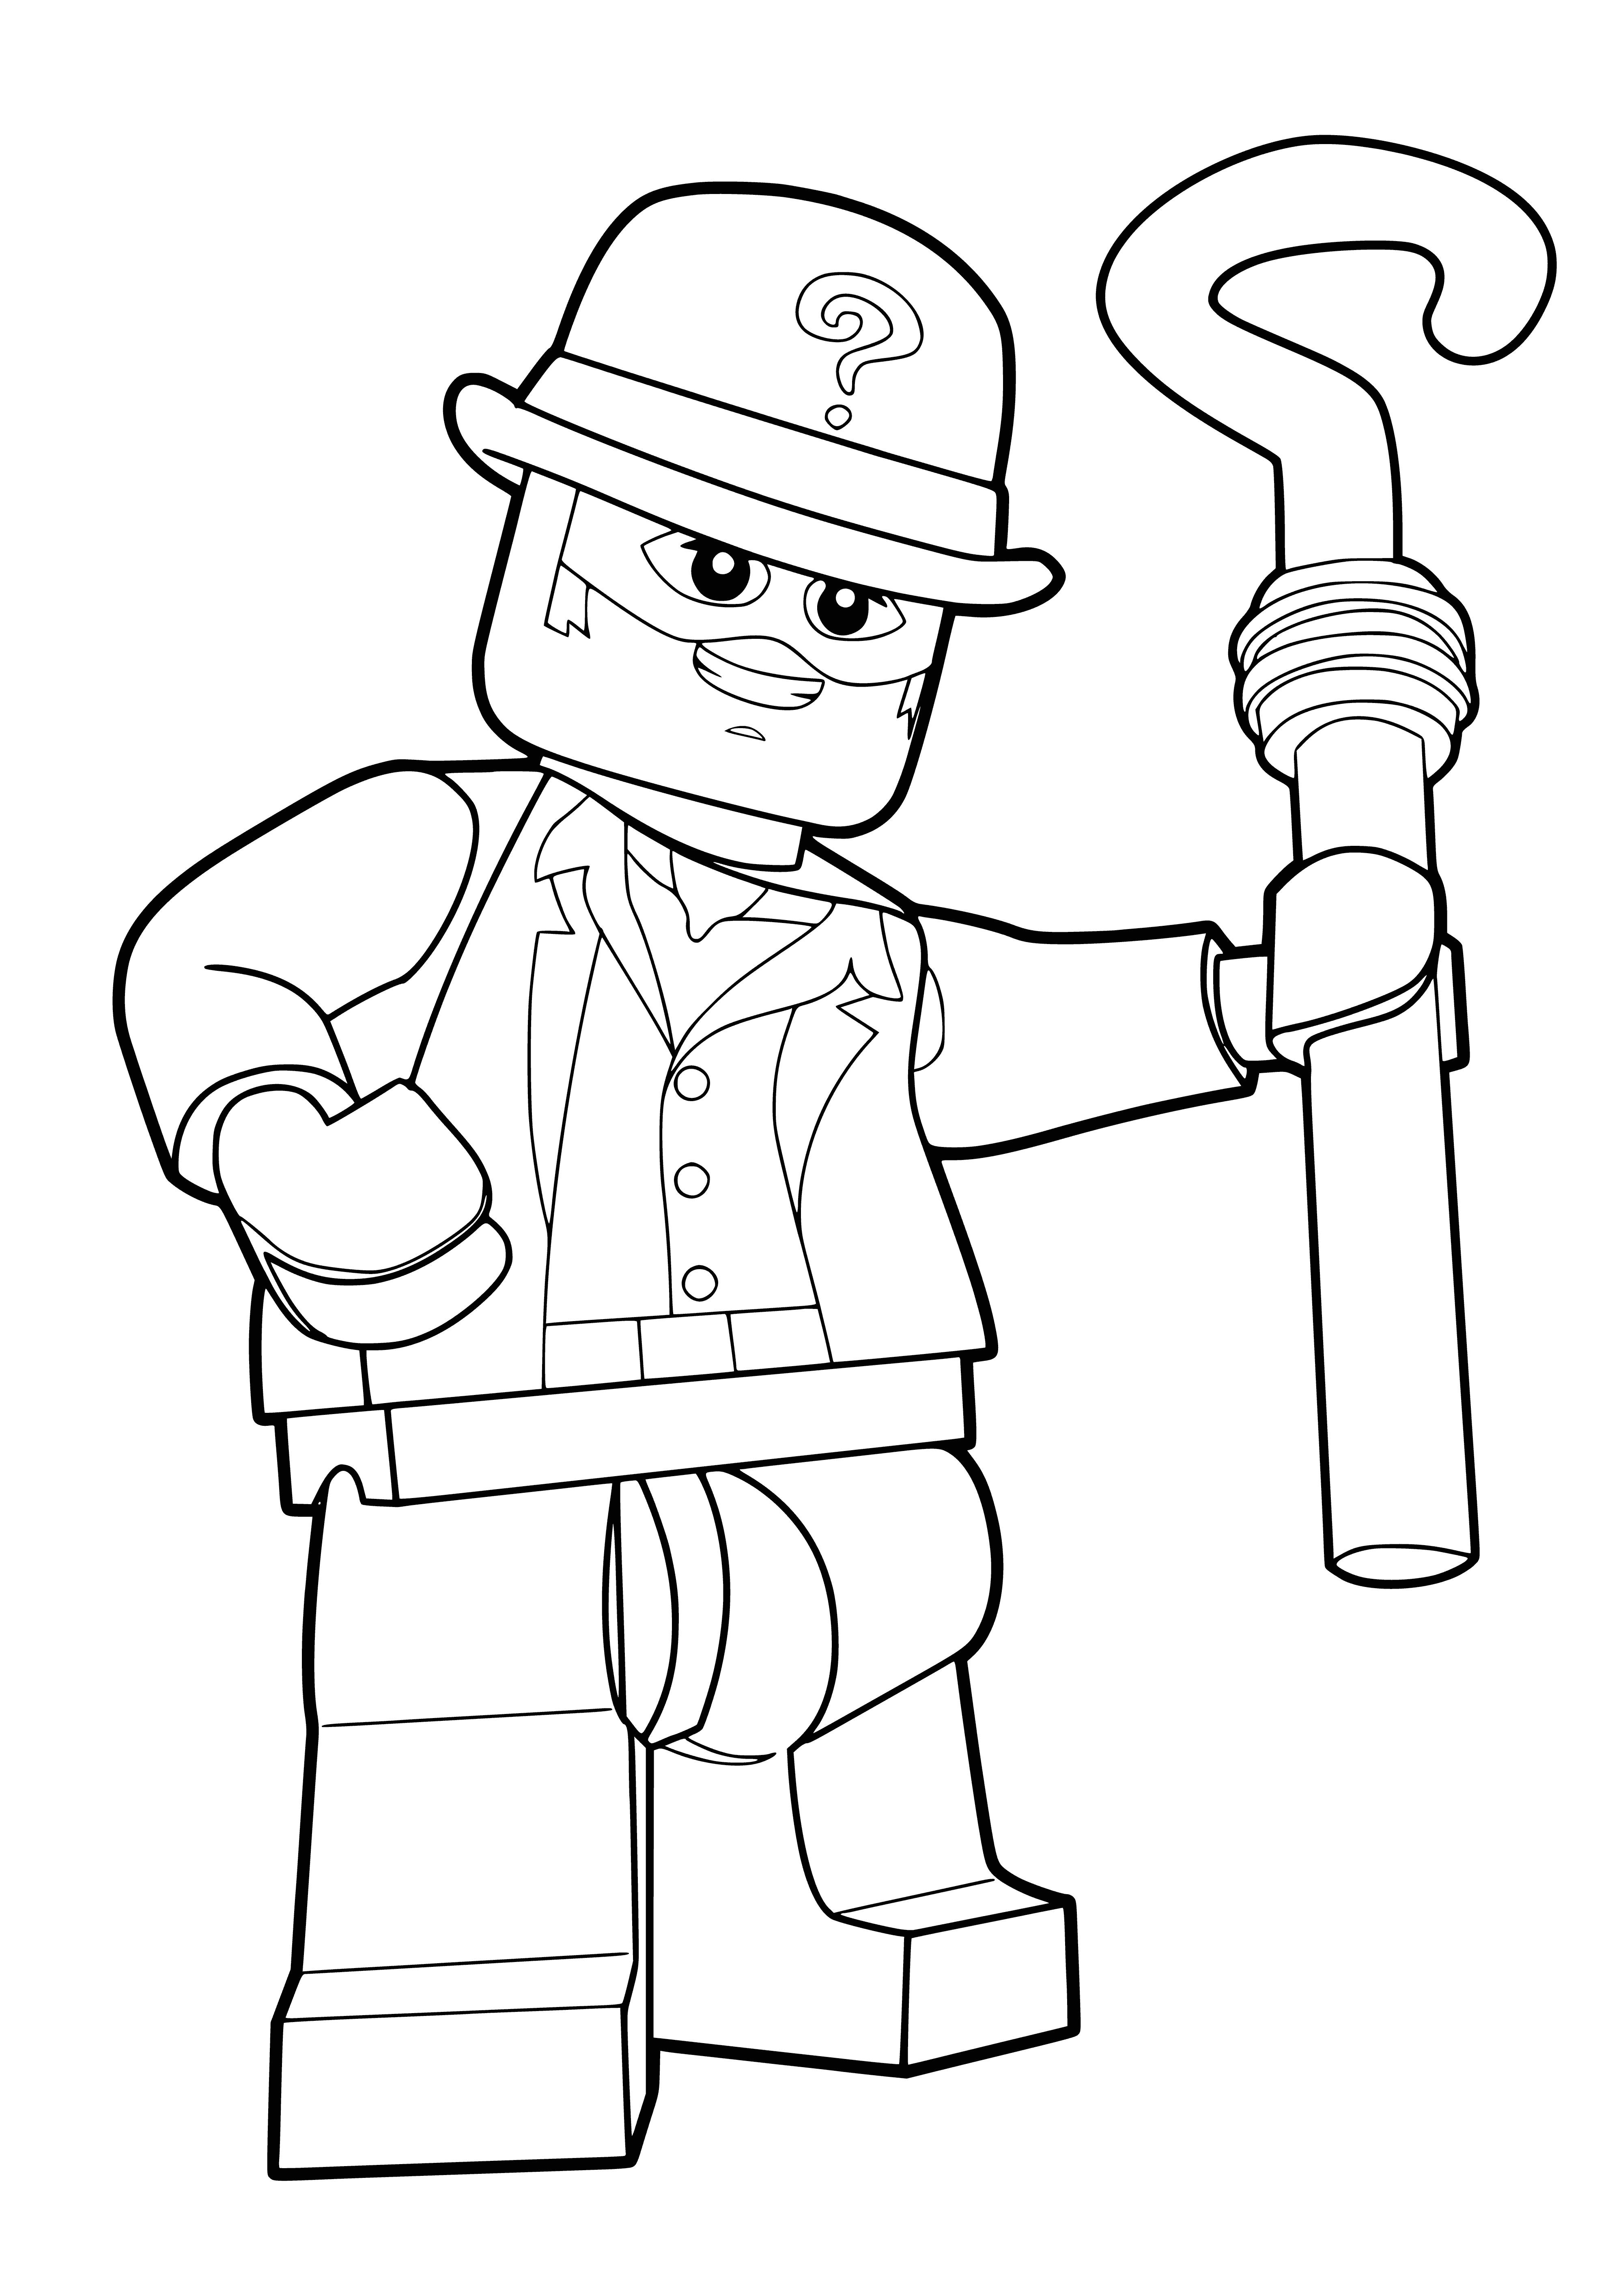 coloring page: LEGO figurine of Riddler: green suit, purple tie, black mask, green question mark, black cane in right hand.